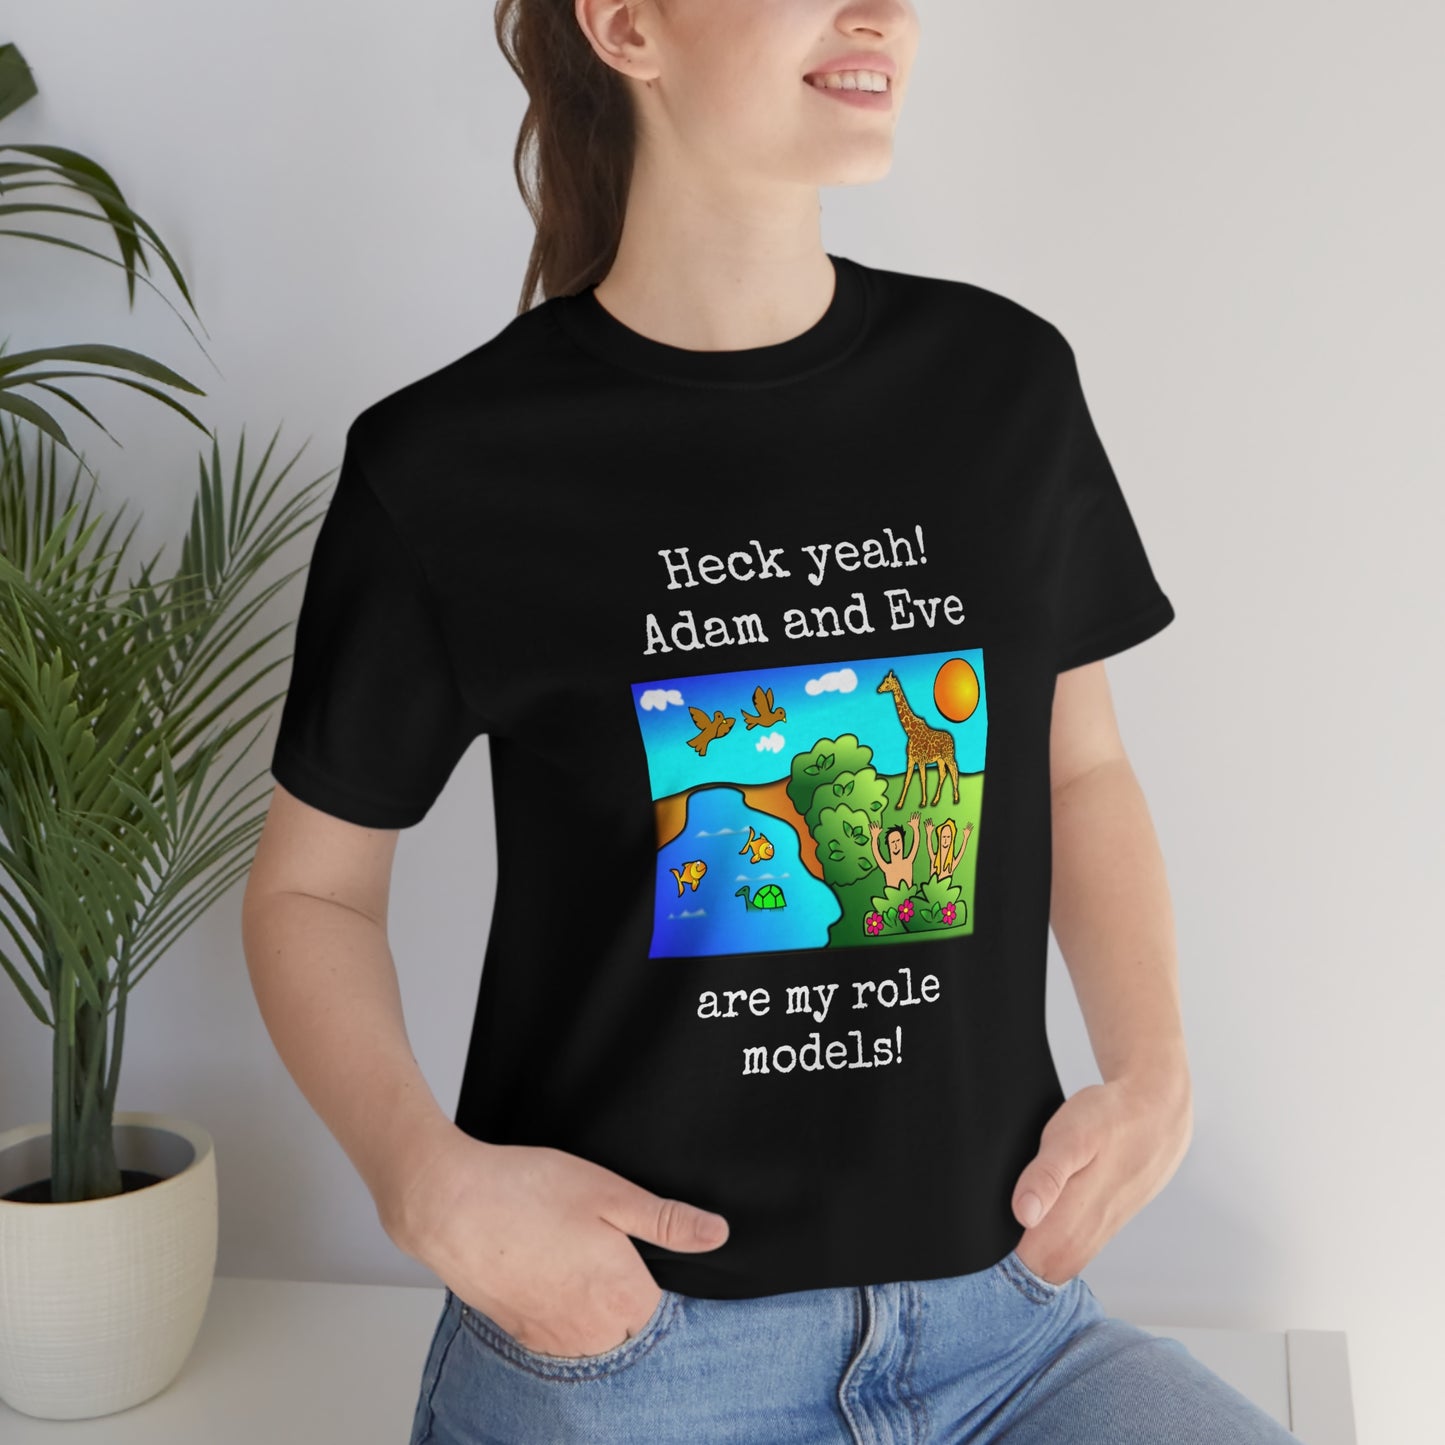 Heck yeah! Adam and Eve are my role models - Funny Religious - Unisex Short Sleeve Tee - CrazyTomTShirts